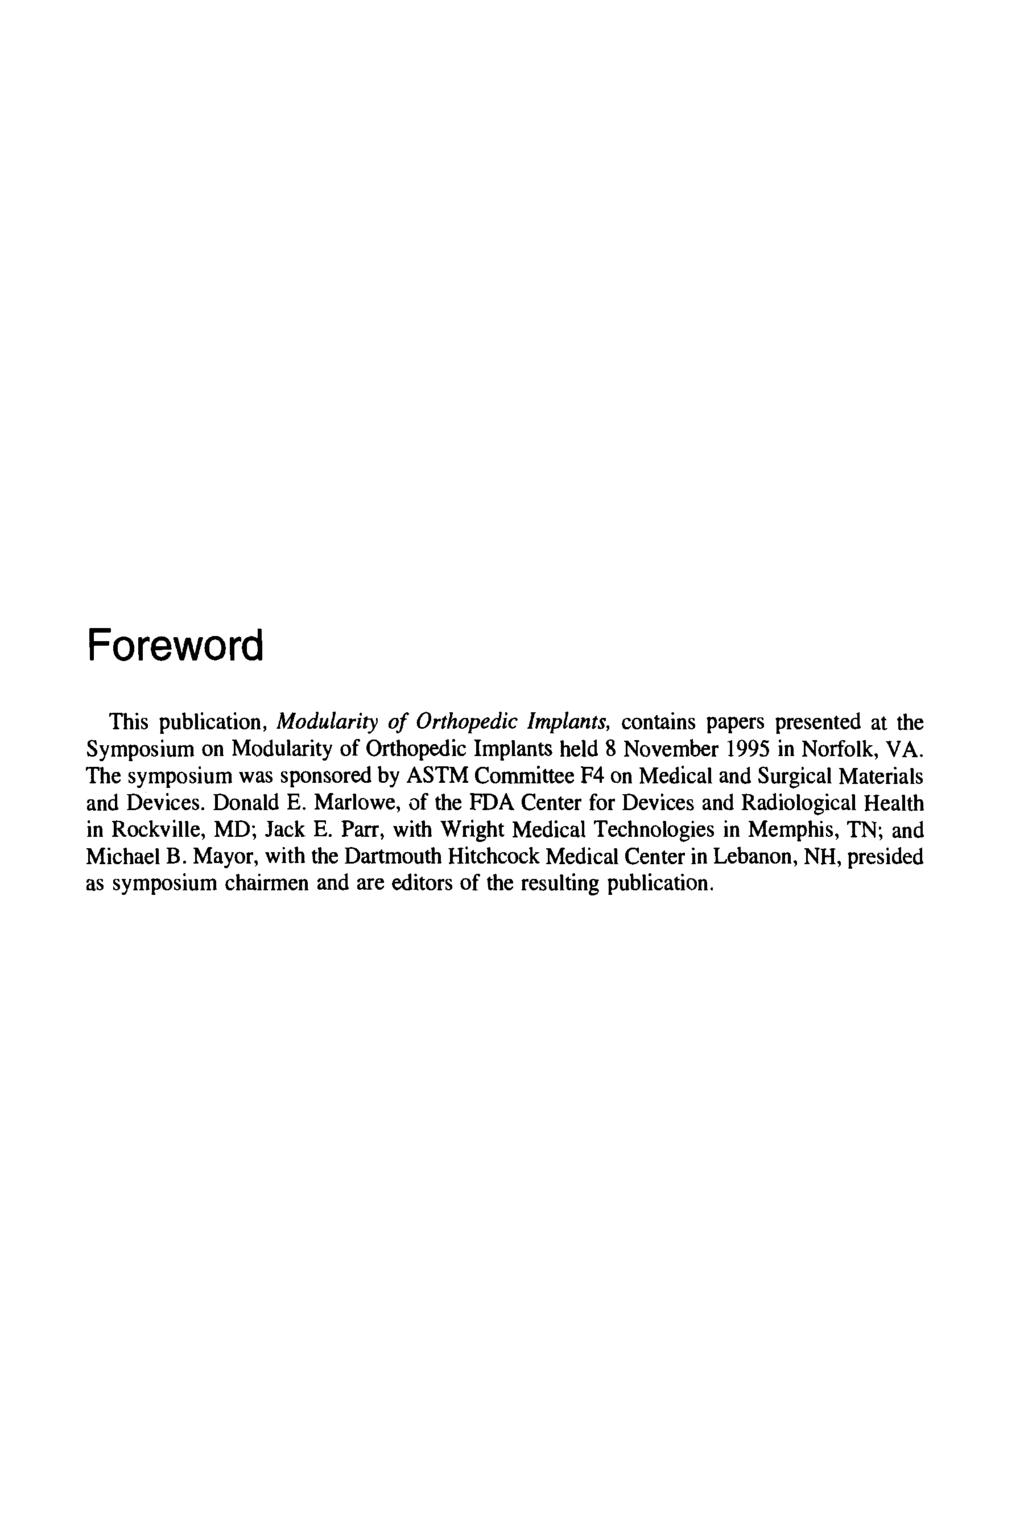 Foreword This publication, Modularity of Orthopedic Implants, contains papers presented at the Symposium on Modularity of Orthopedic Implants held 8 November 1995 in Norfolk, VA.